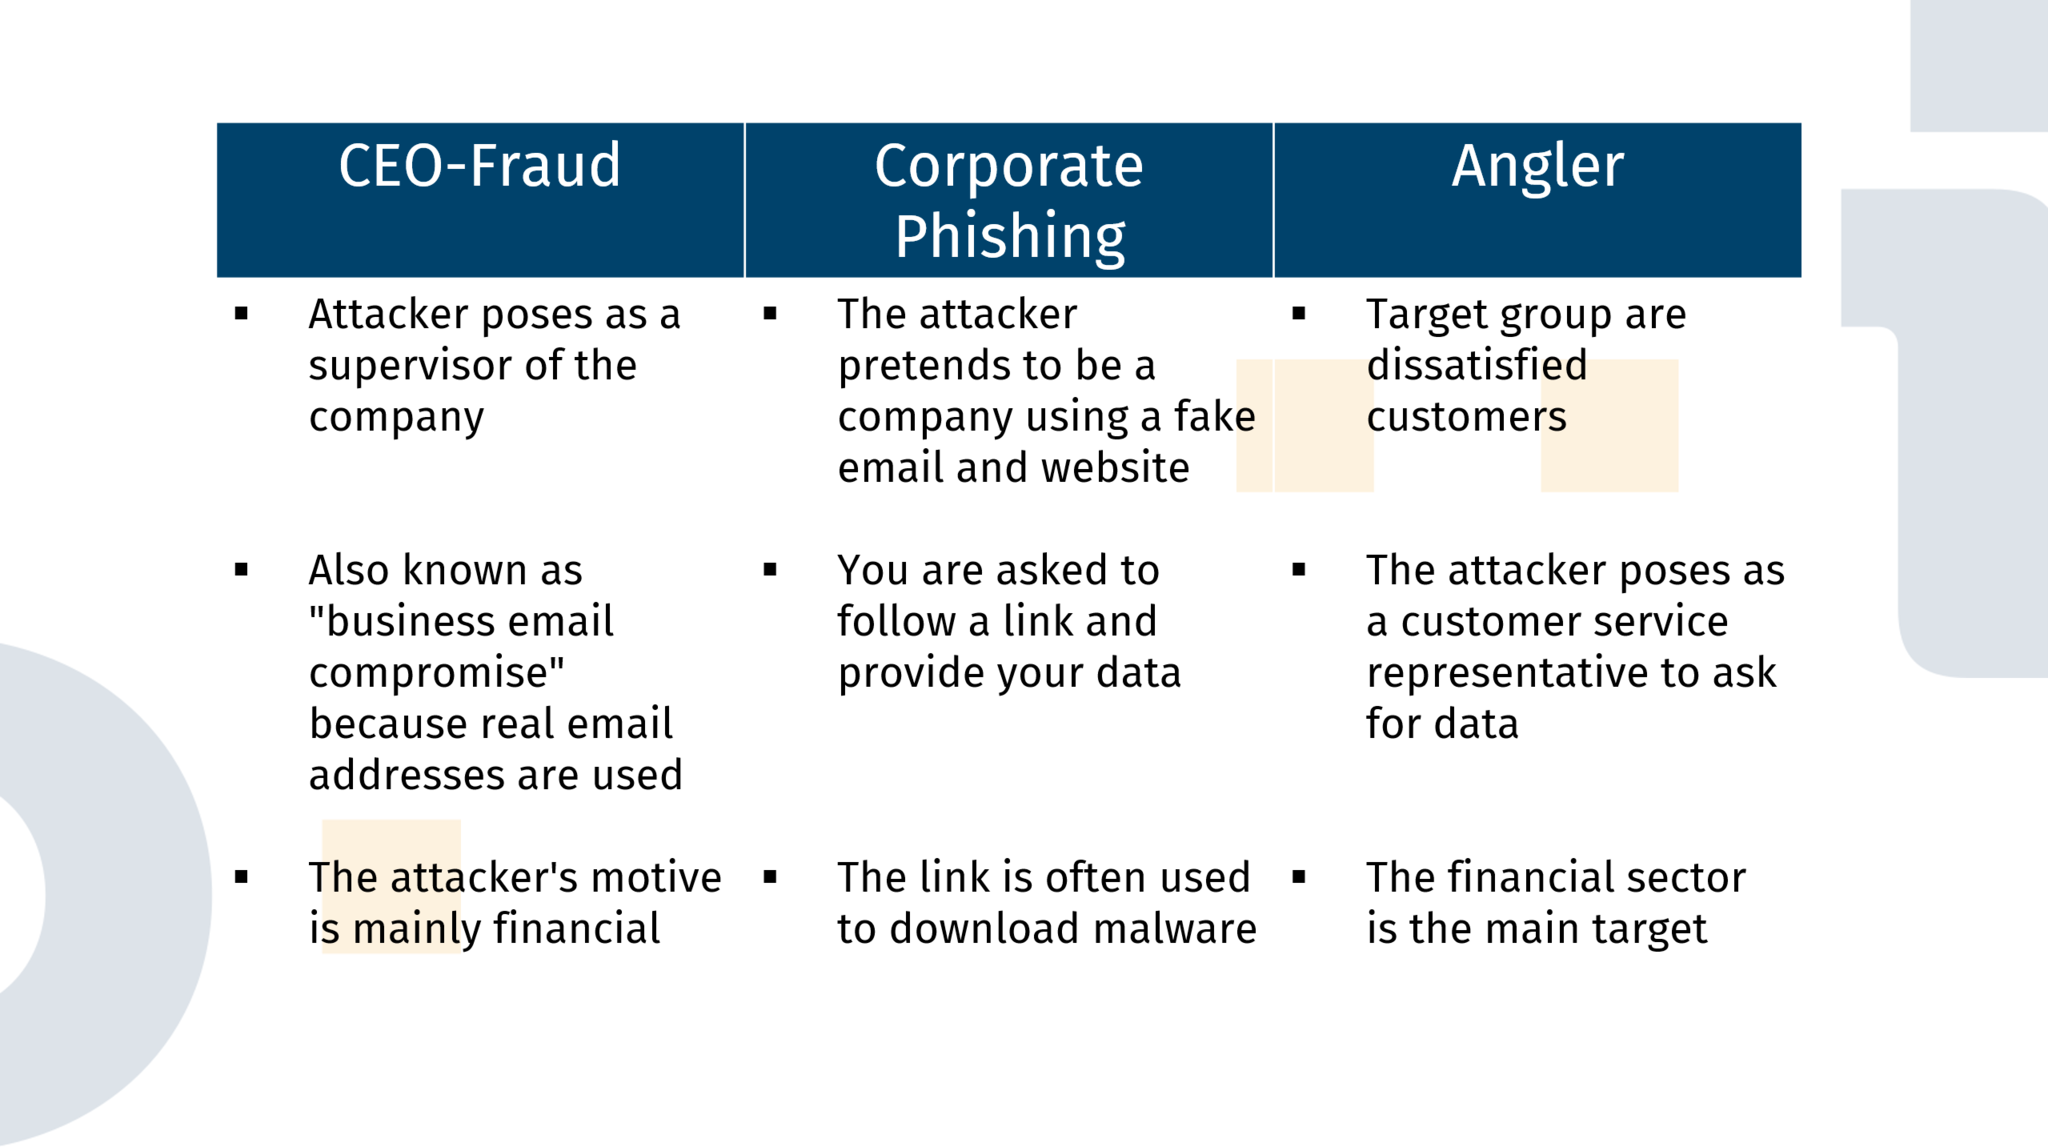 A three-part overview of CEO-Fraud, Corporate Phishing and Angler. CEO-Fraud is when the attacker pretends to be a supirior of a company and instructs the employees to make a transfer. The motive of the attacker is thus mainly financial. This type of phishing is also called 'Business Email Compromise' because real email addresses are being used. If an attacker pretends to be a company, using fake email addresses and websites, then it is corporate phishing. Here an attempt is made to ask you to follow a link, so that you enter your data. Malware is often downloaded when the link is opened. An Angler Phishing attack has dissatisfied customers as the target group. The attacker poses as customer support to get a hold of your data.The financial sector is the most affected.